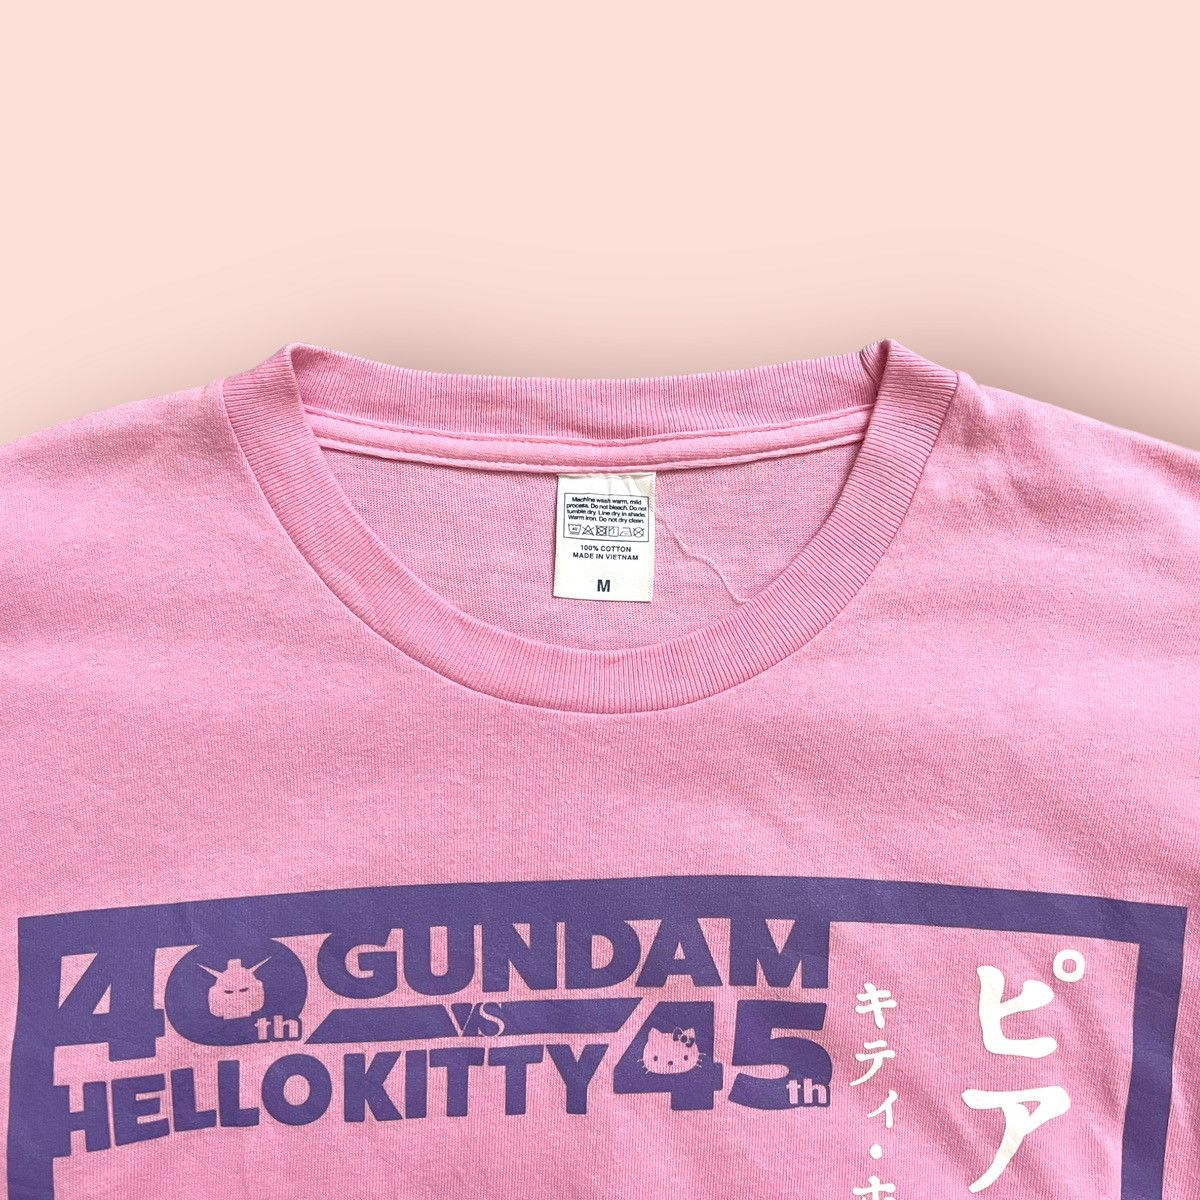 Japanese Brand LIMITED EDITION 2019 GUNDAM X HELLO KITTY PINK TEE IN PINK Size US M / EU 48-50 / 2 - 9 Thumbnail